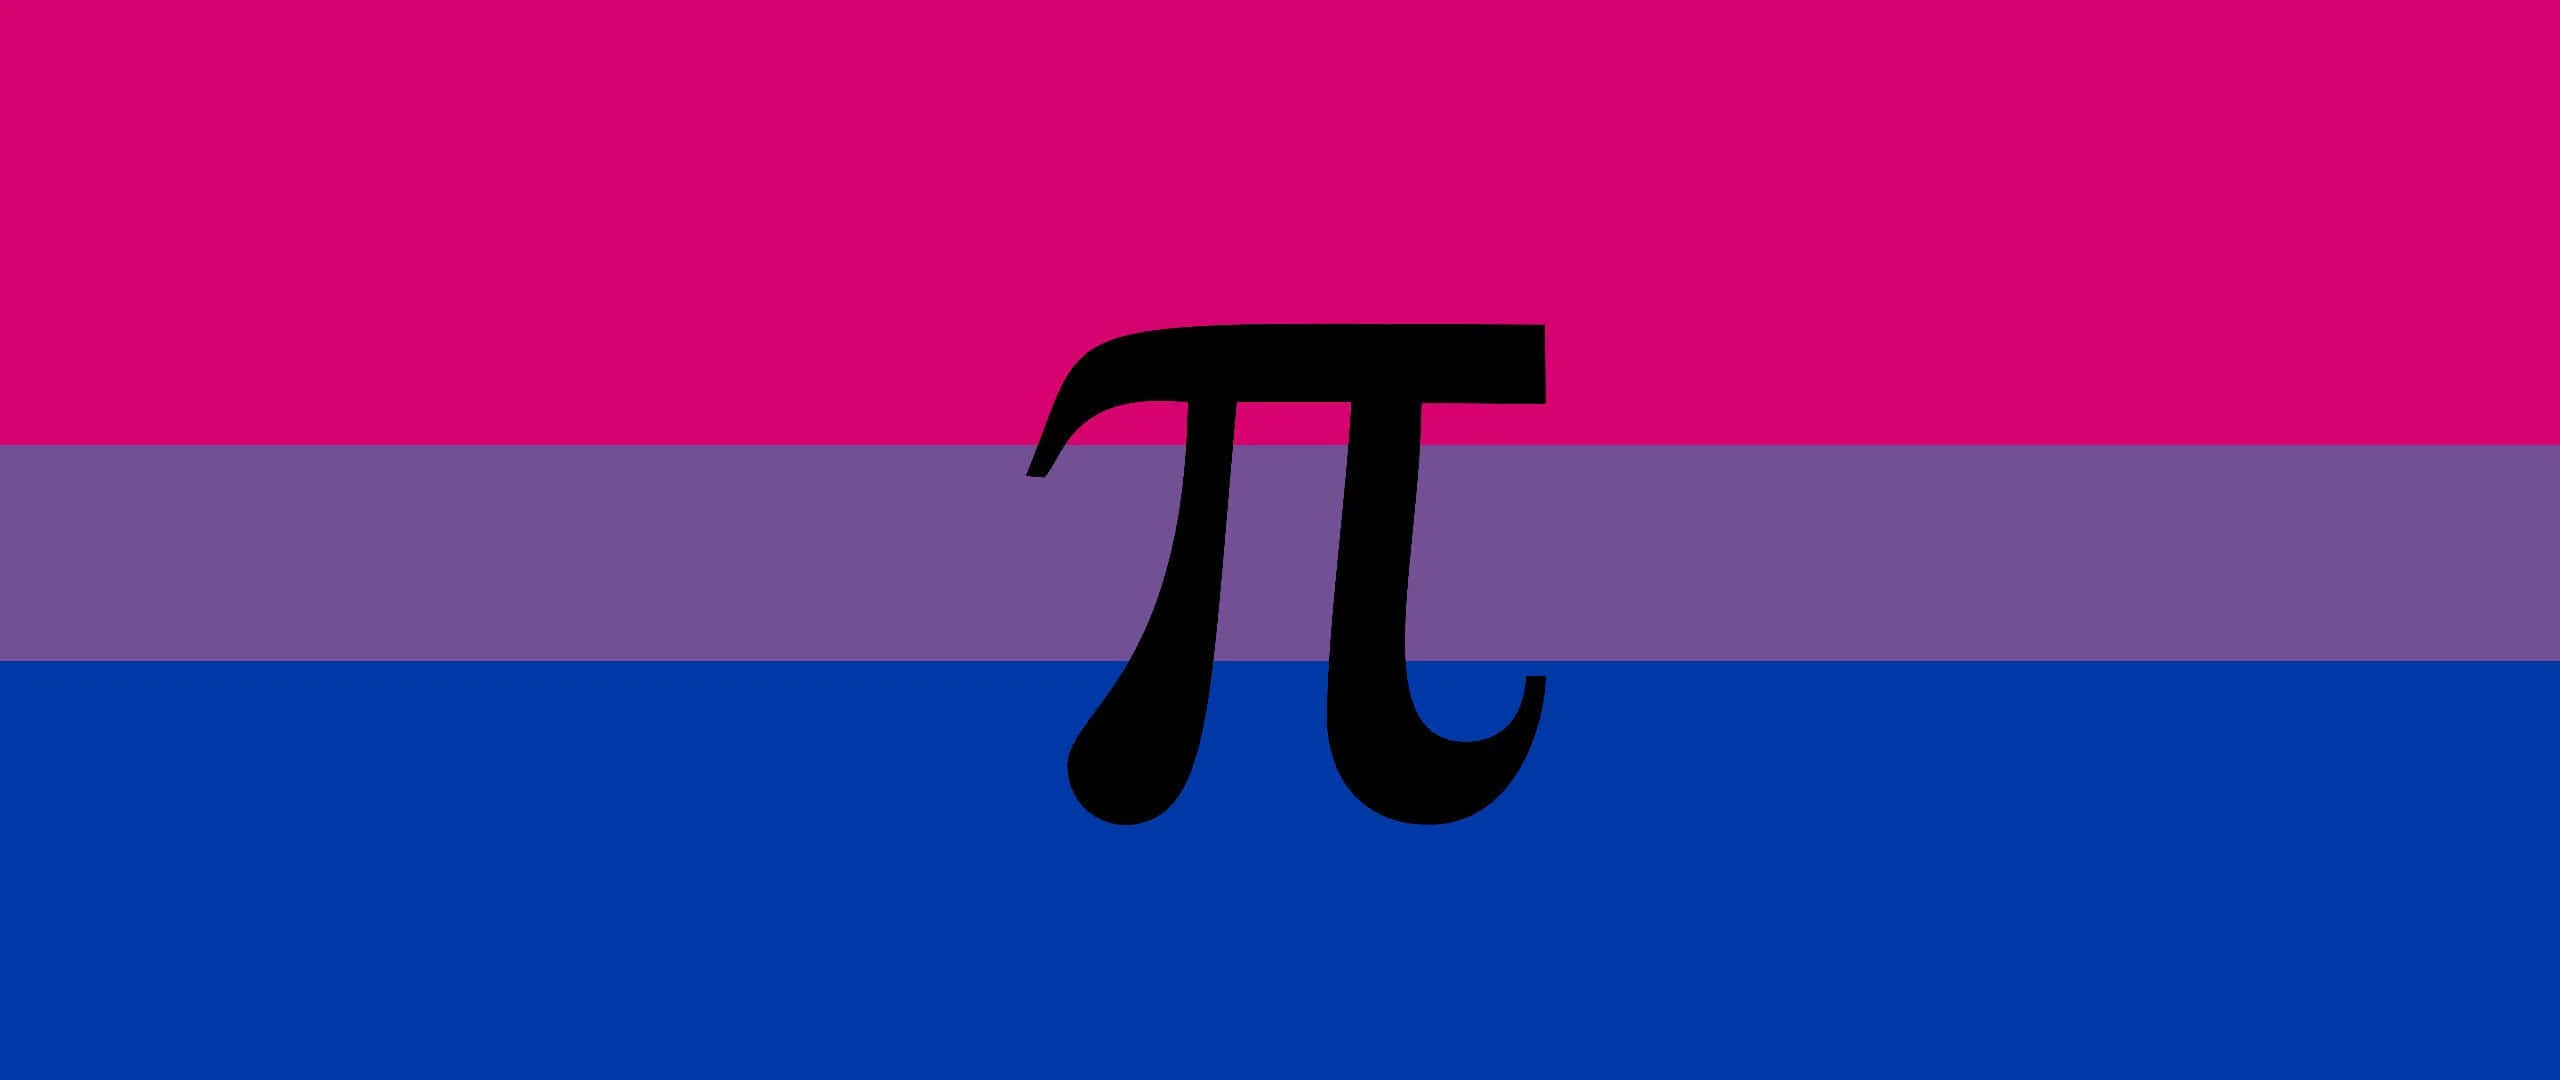 Pi Symbol On A Pink And Blue Flag